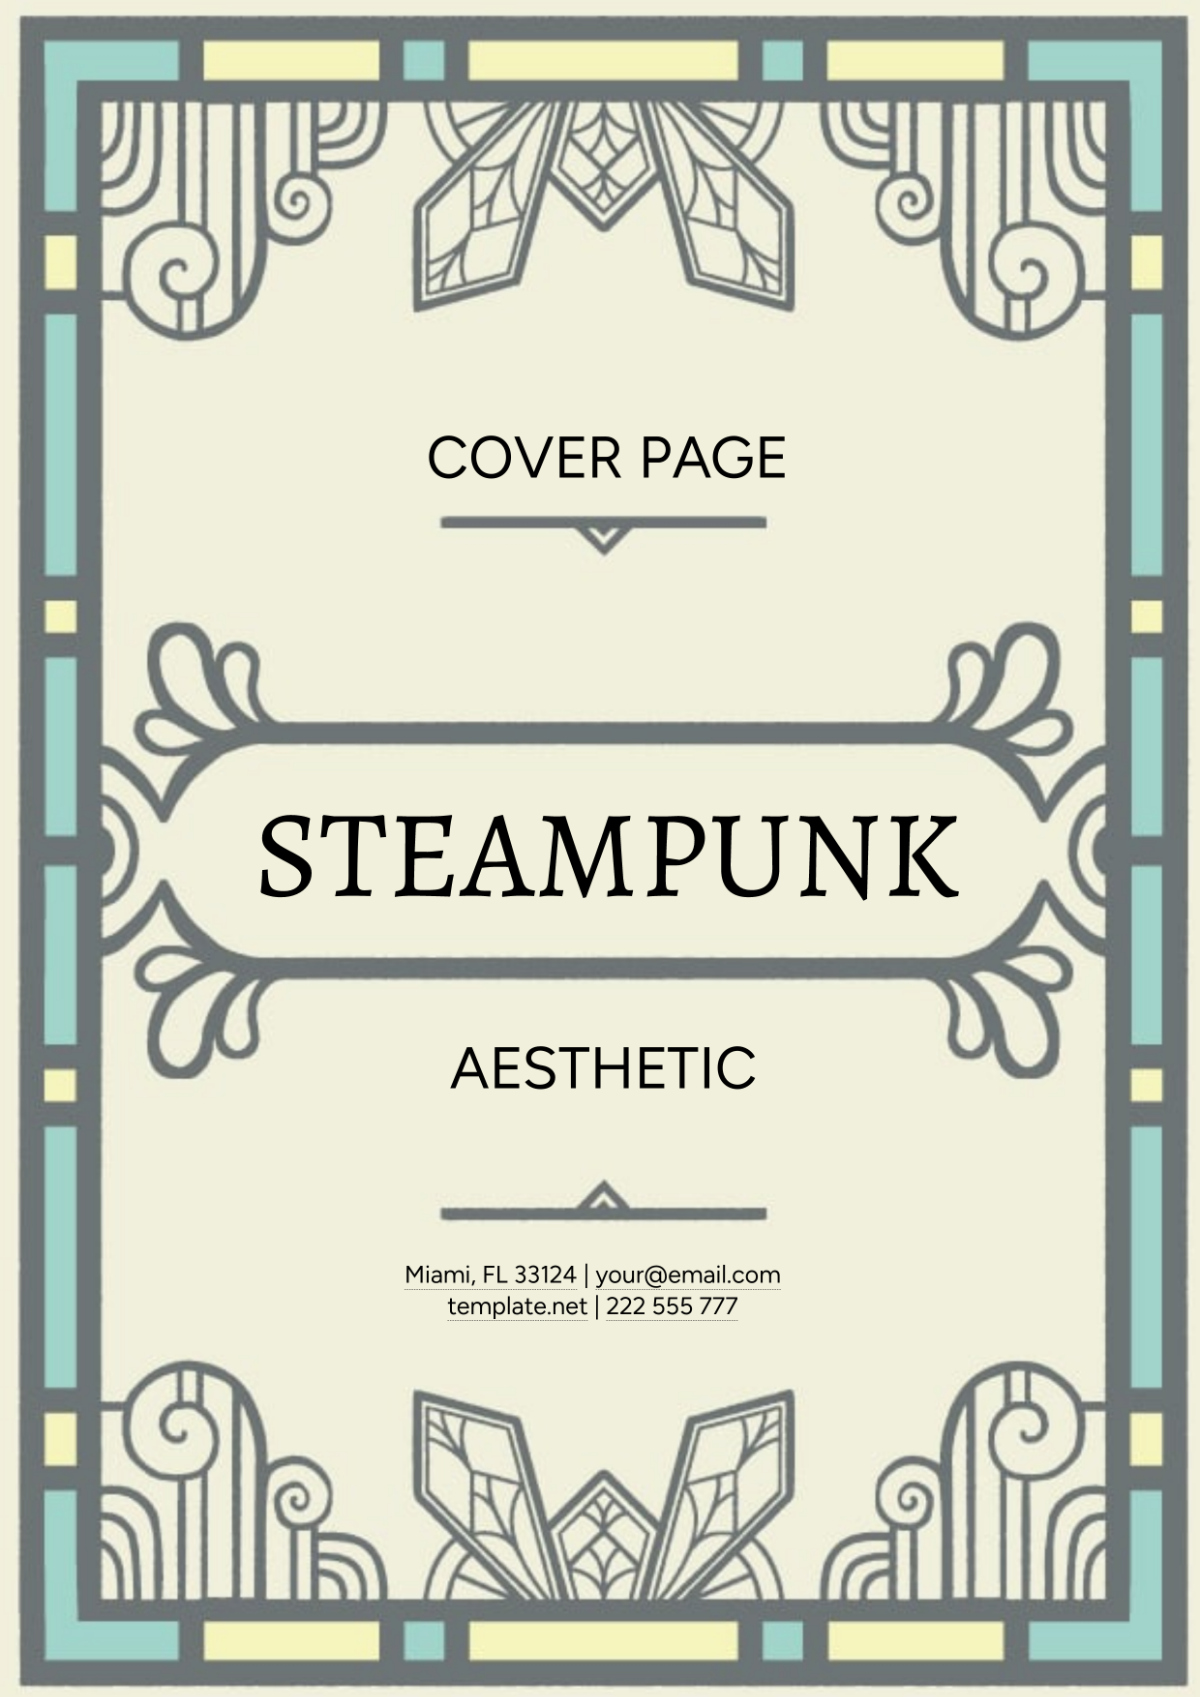 Steampunk Aesthetic Cover Page Template